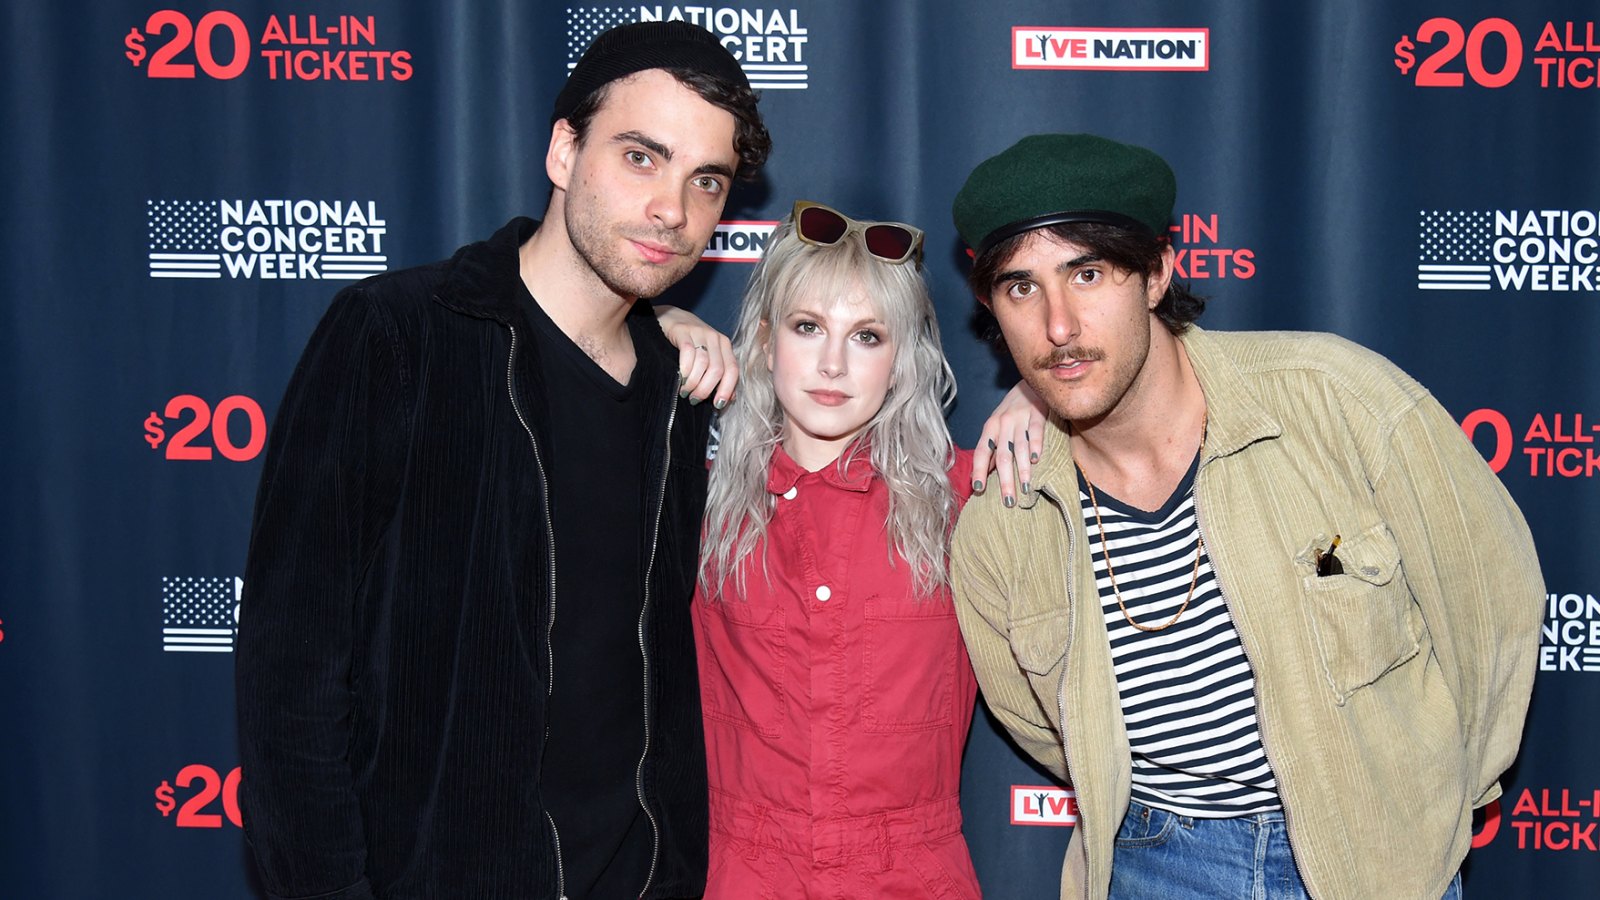 Paramore Wipes Their Social Media After Dropping Out of Concert Due to ‘Unforeseen Circumstances’